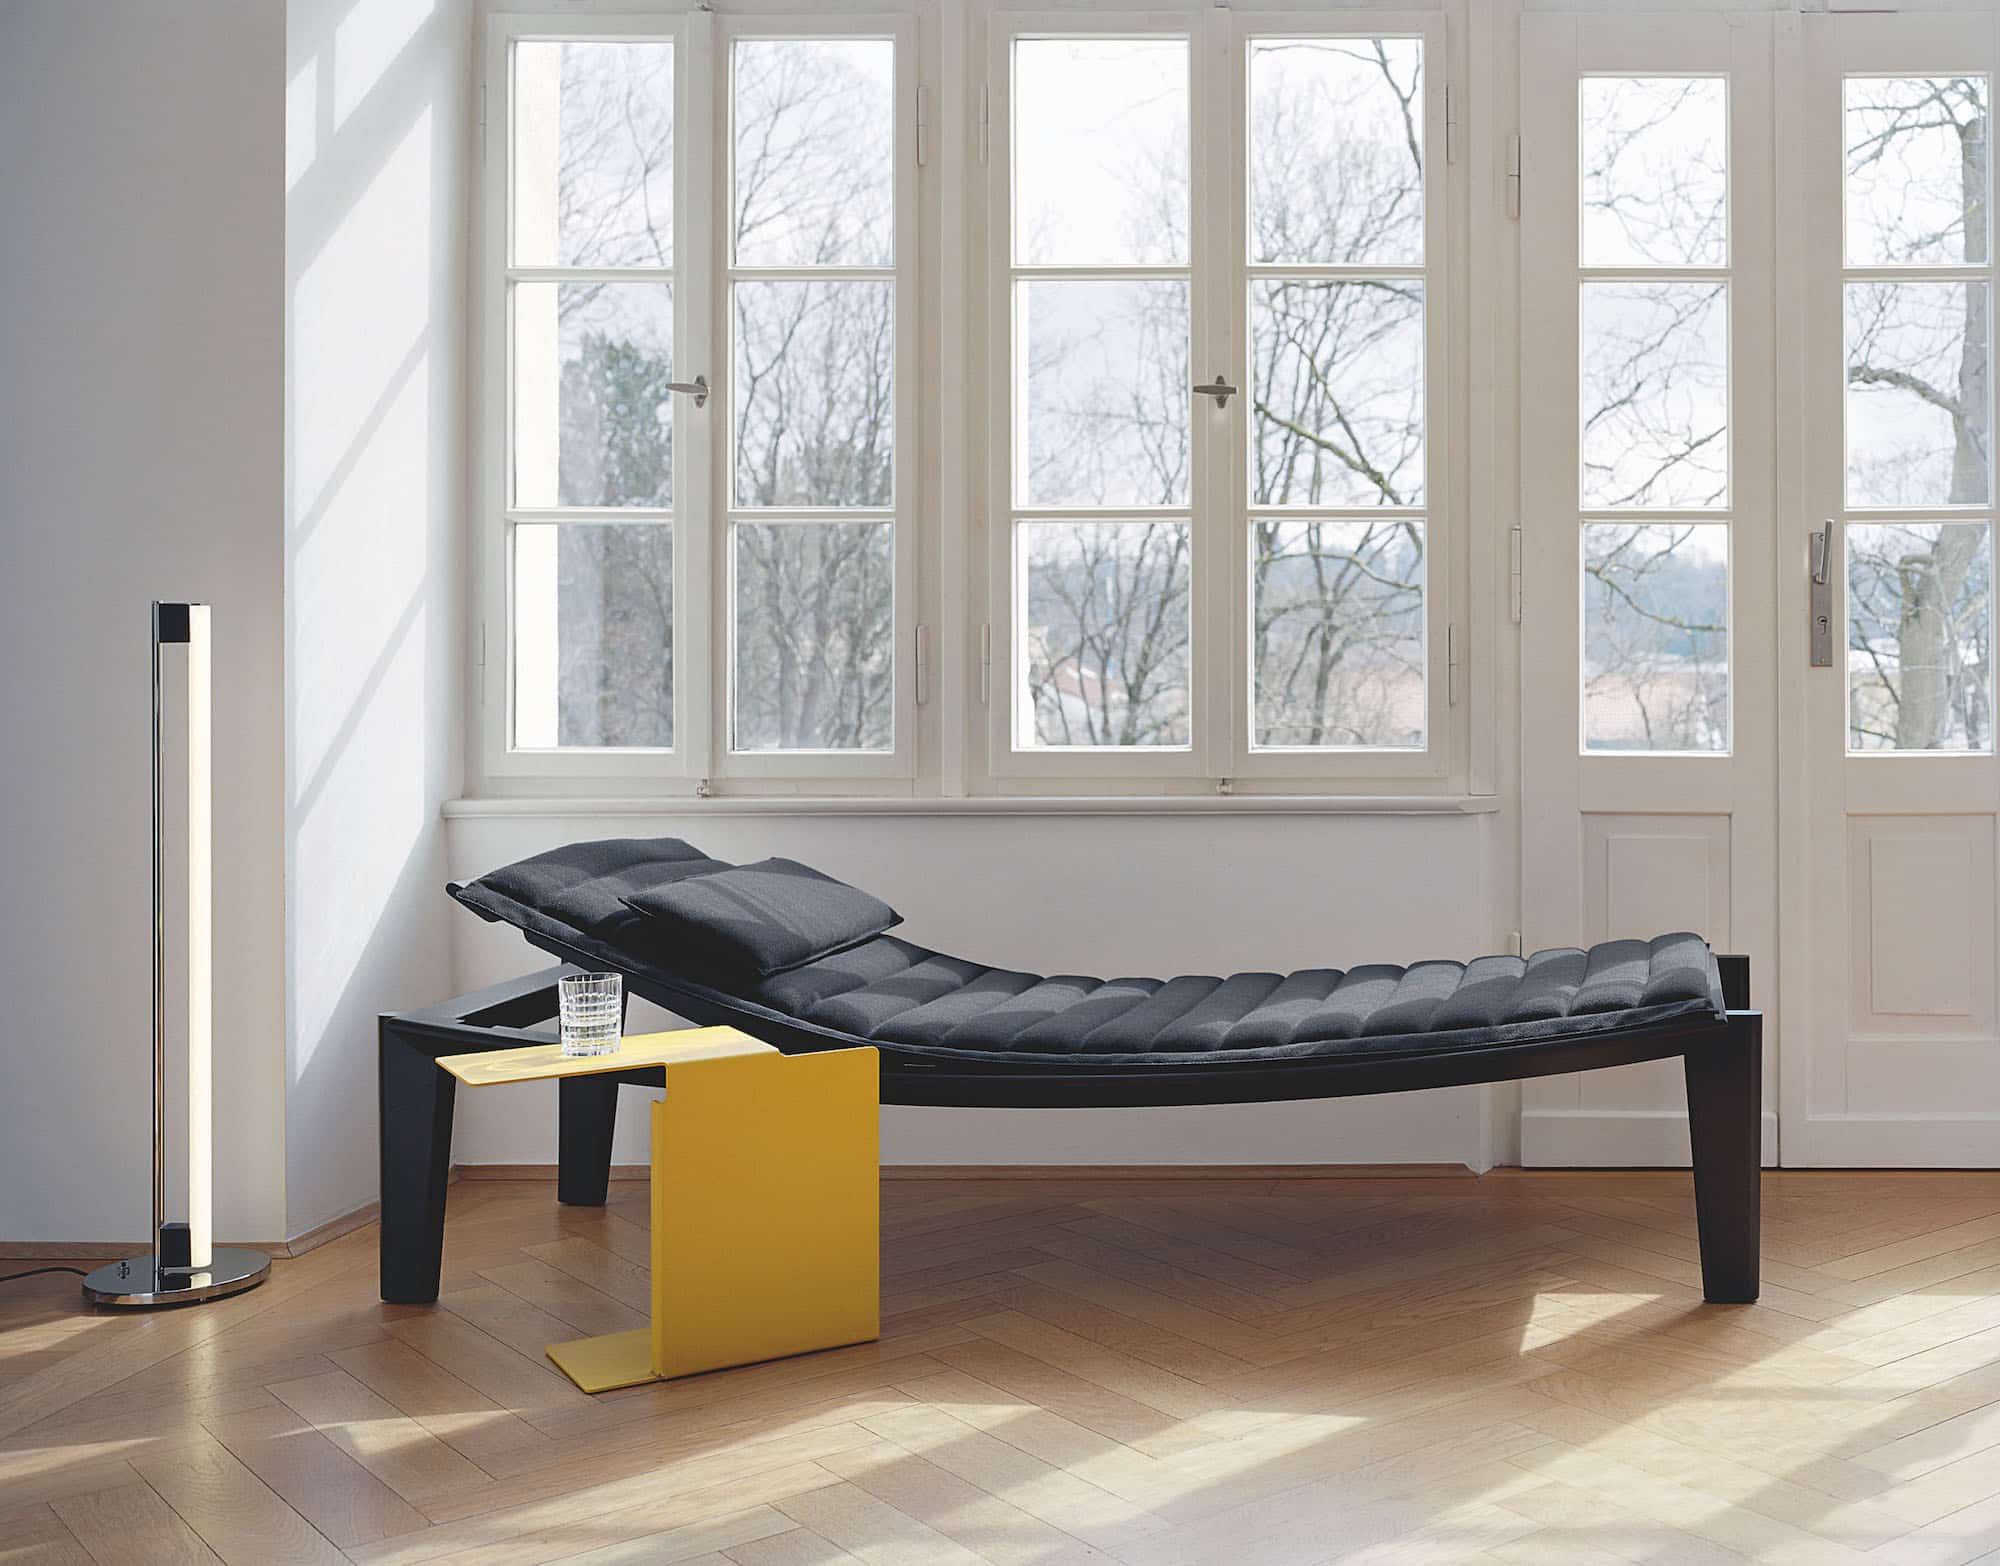 Konstantin Grcic's Ulisse daybed and Diana A side table accompanied by Eileen Gray's Tube light, 1927